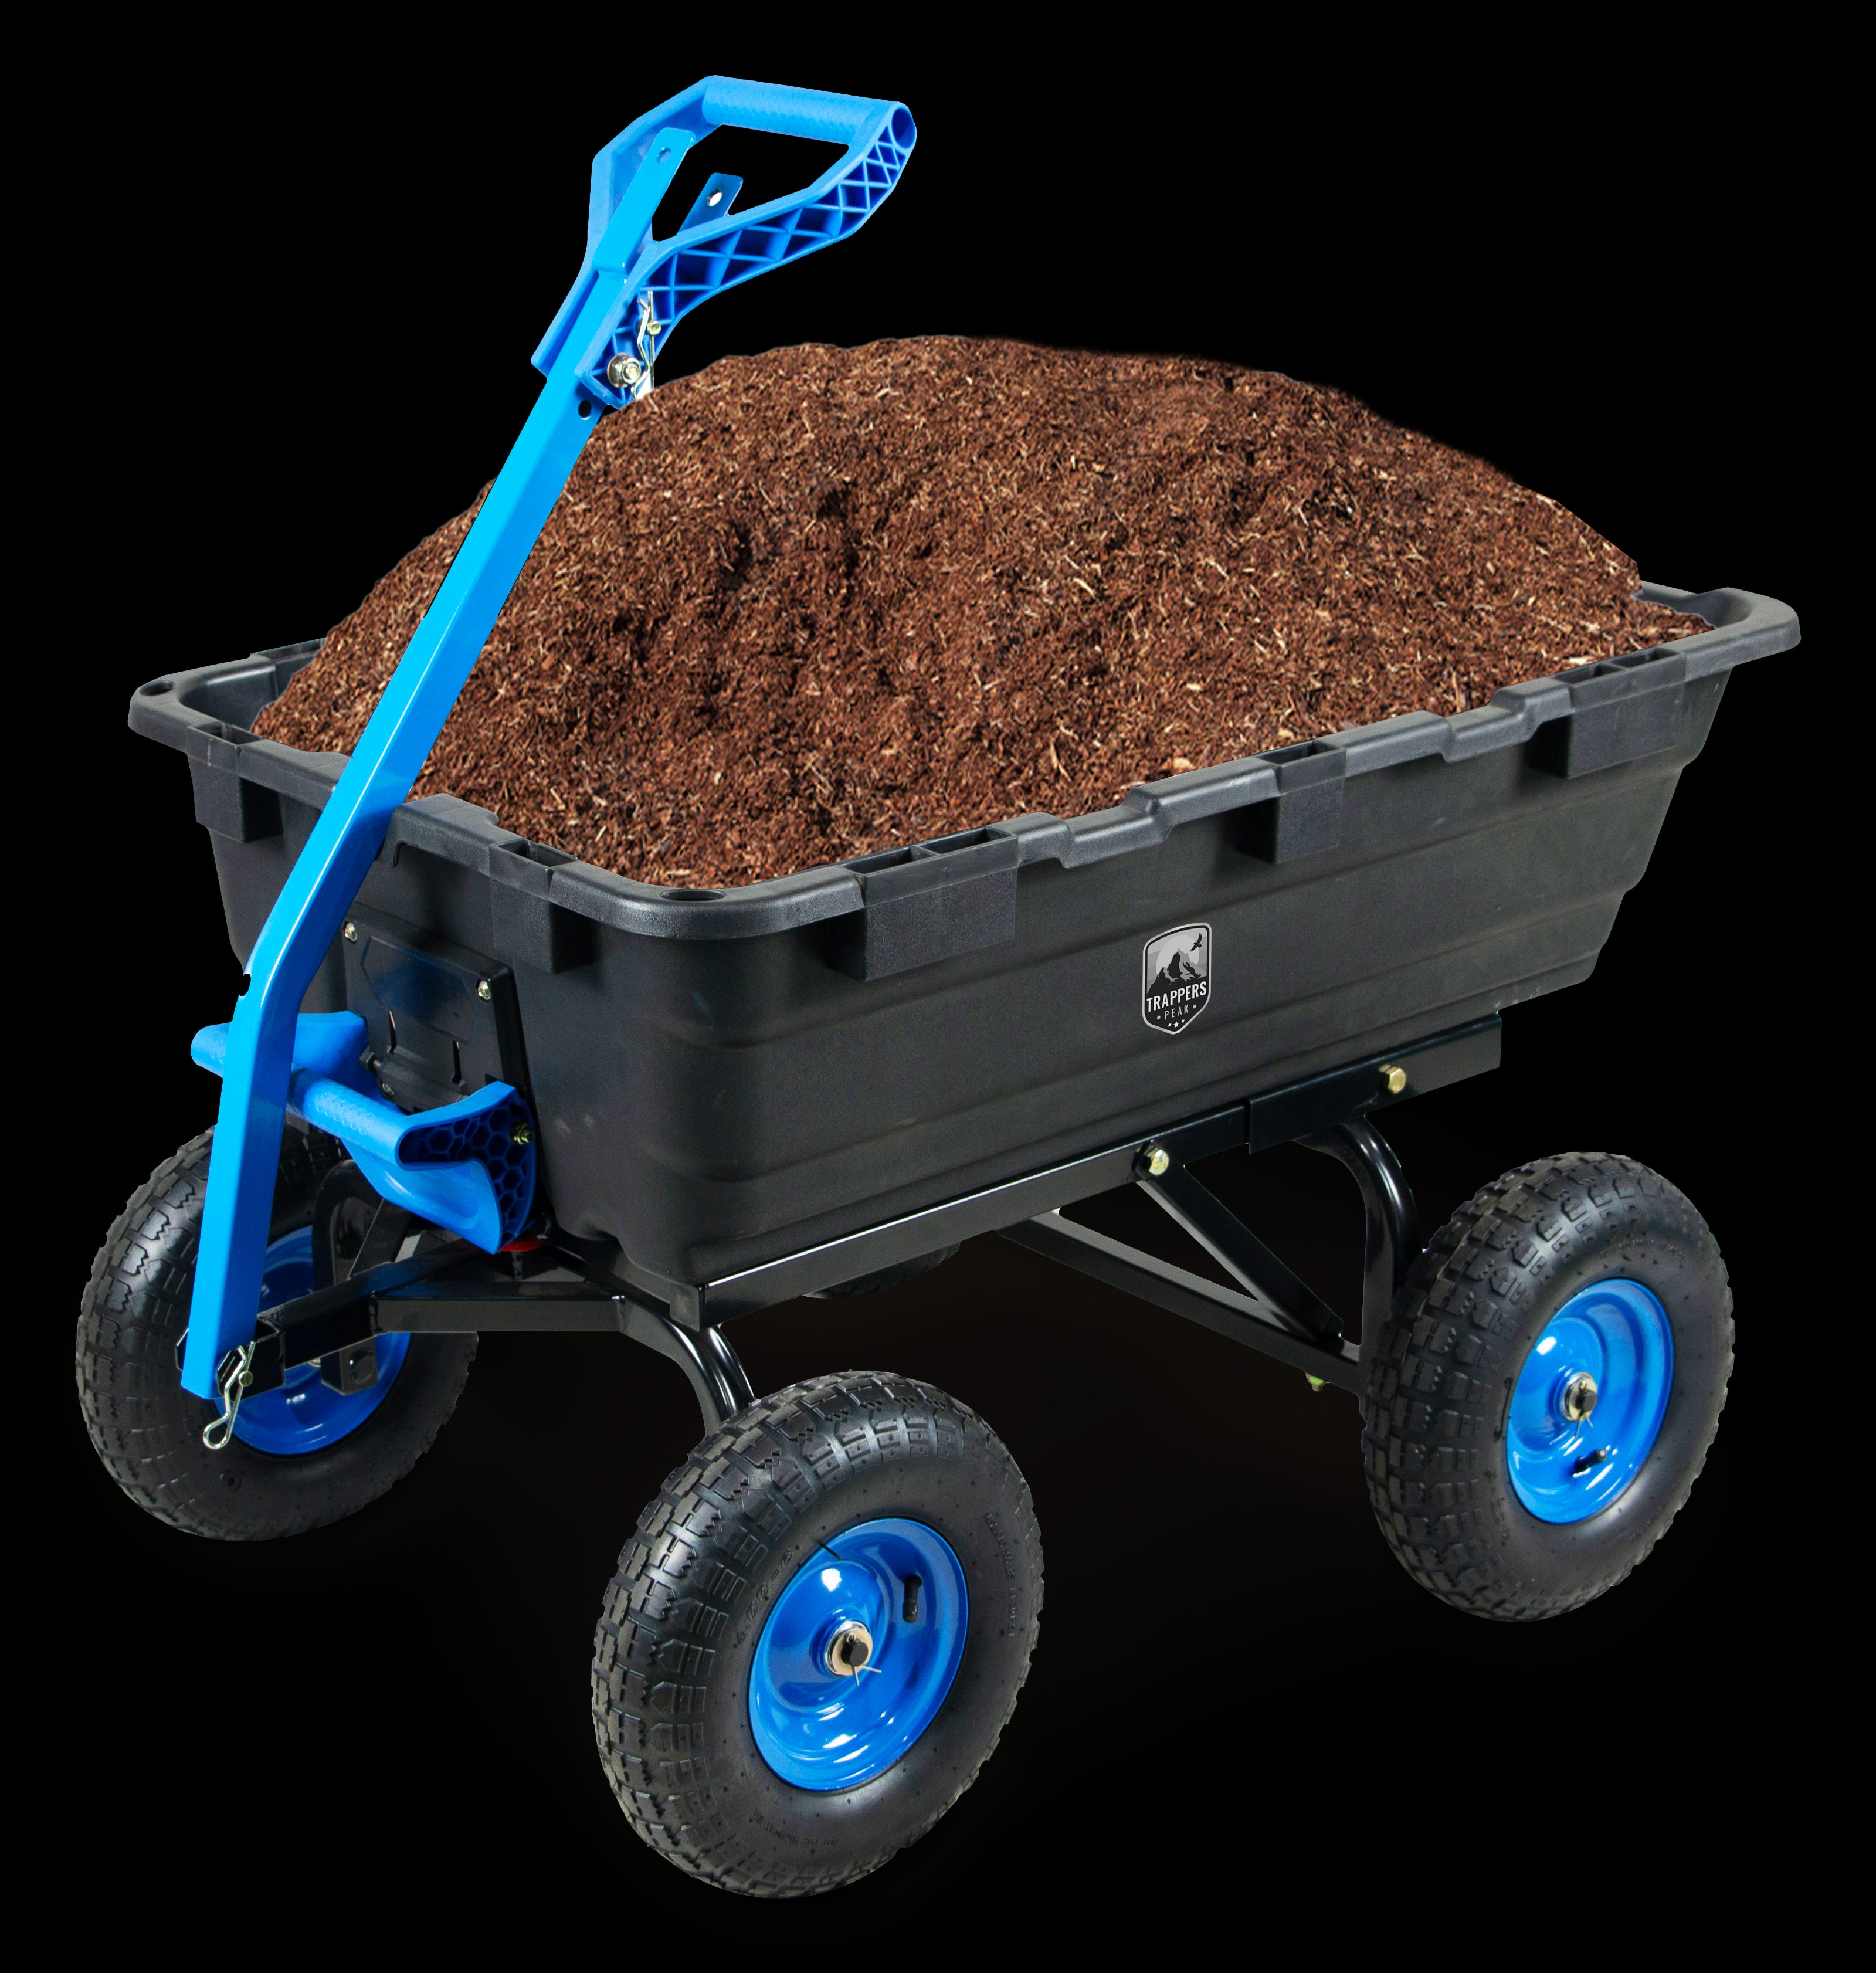 Heavy Duty Cart, Extra Large, 7 Cubic Feet, 1,100 lb load capacity, 13" Air Filled Wheels, and 42" x 23" Bed Size